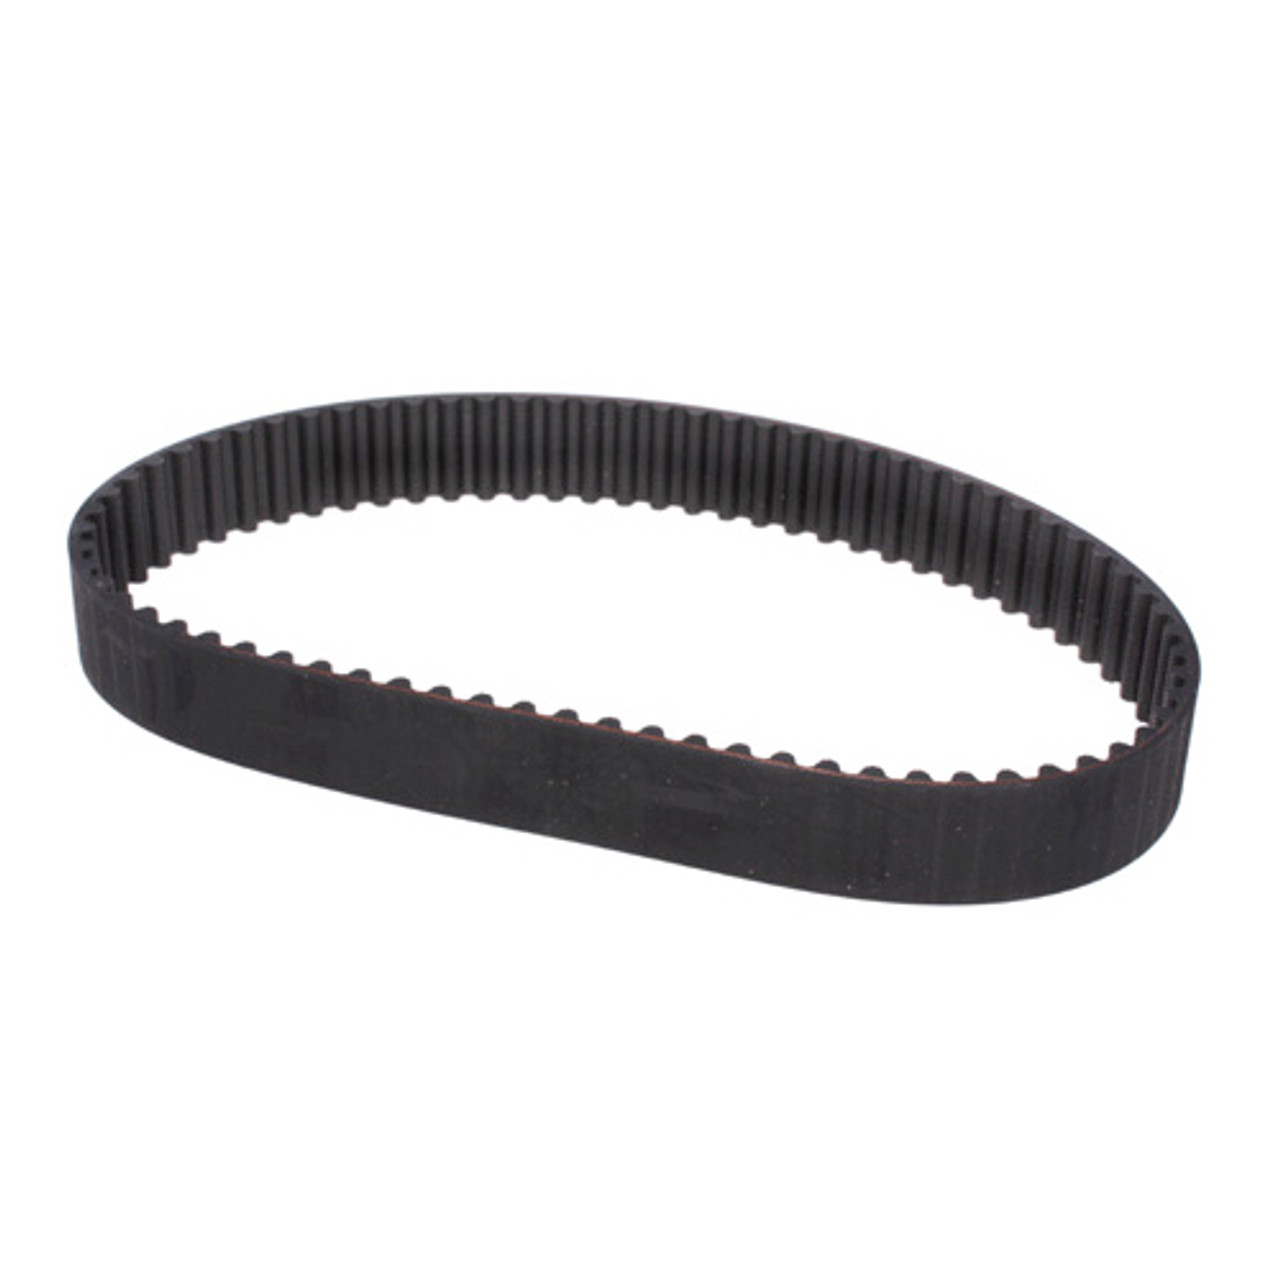 Replacement Timing Belt For 5100 Belt Drive Sys.